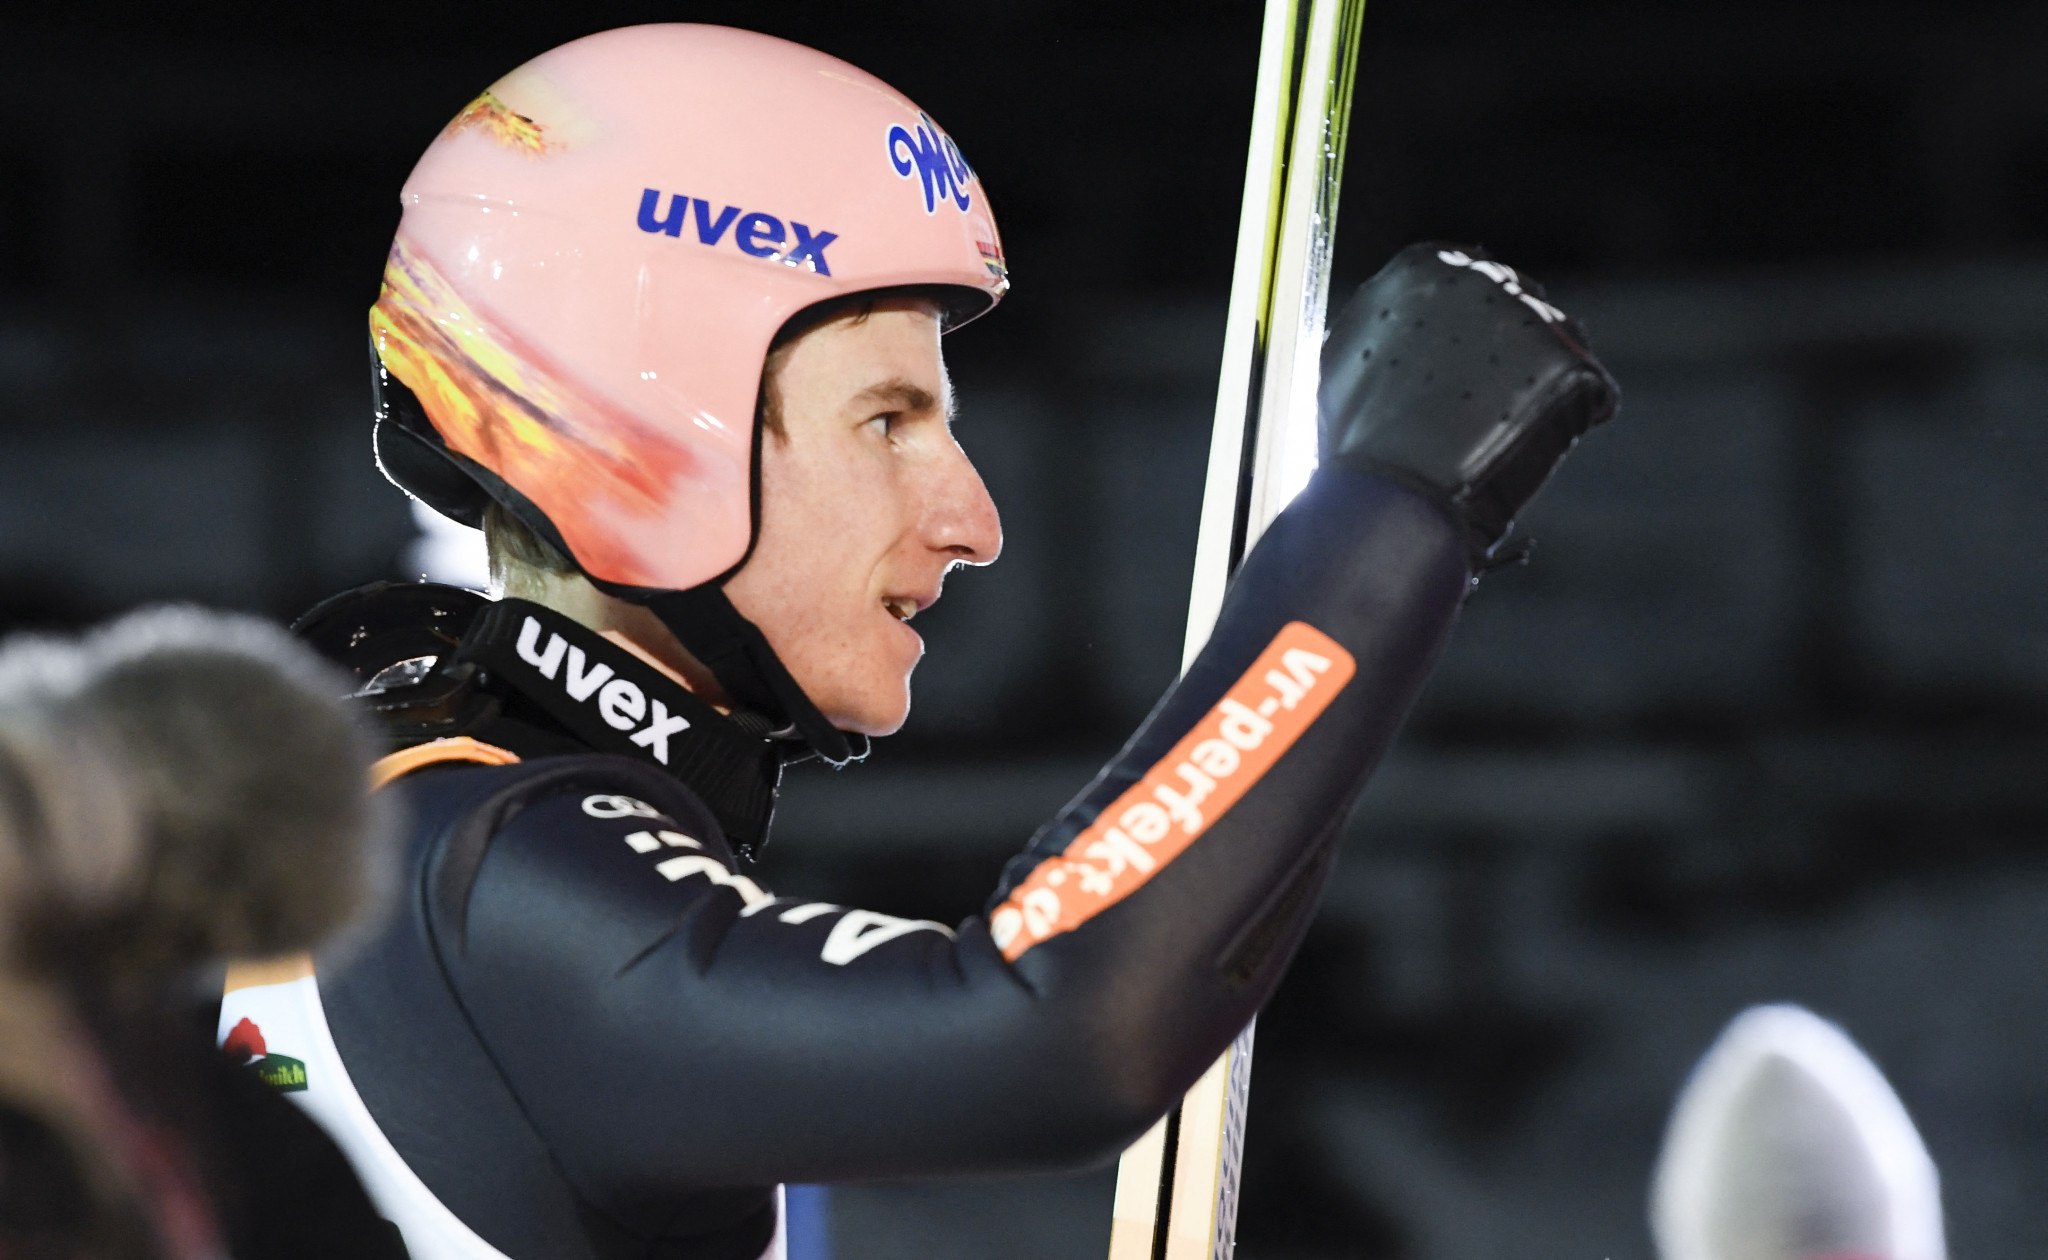 Karl Geiger has now extended his lead in the Ski Jumping World Cup standings ©Getty Images